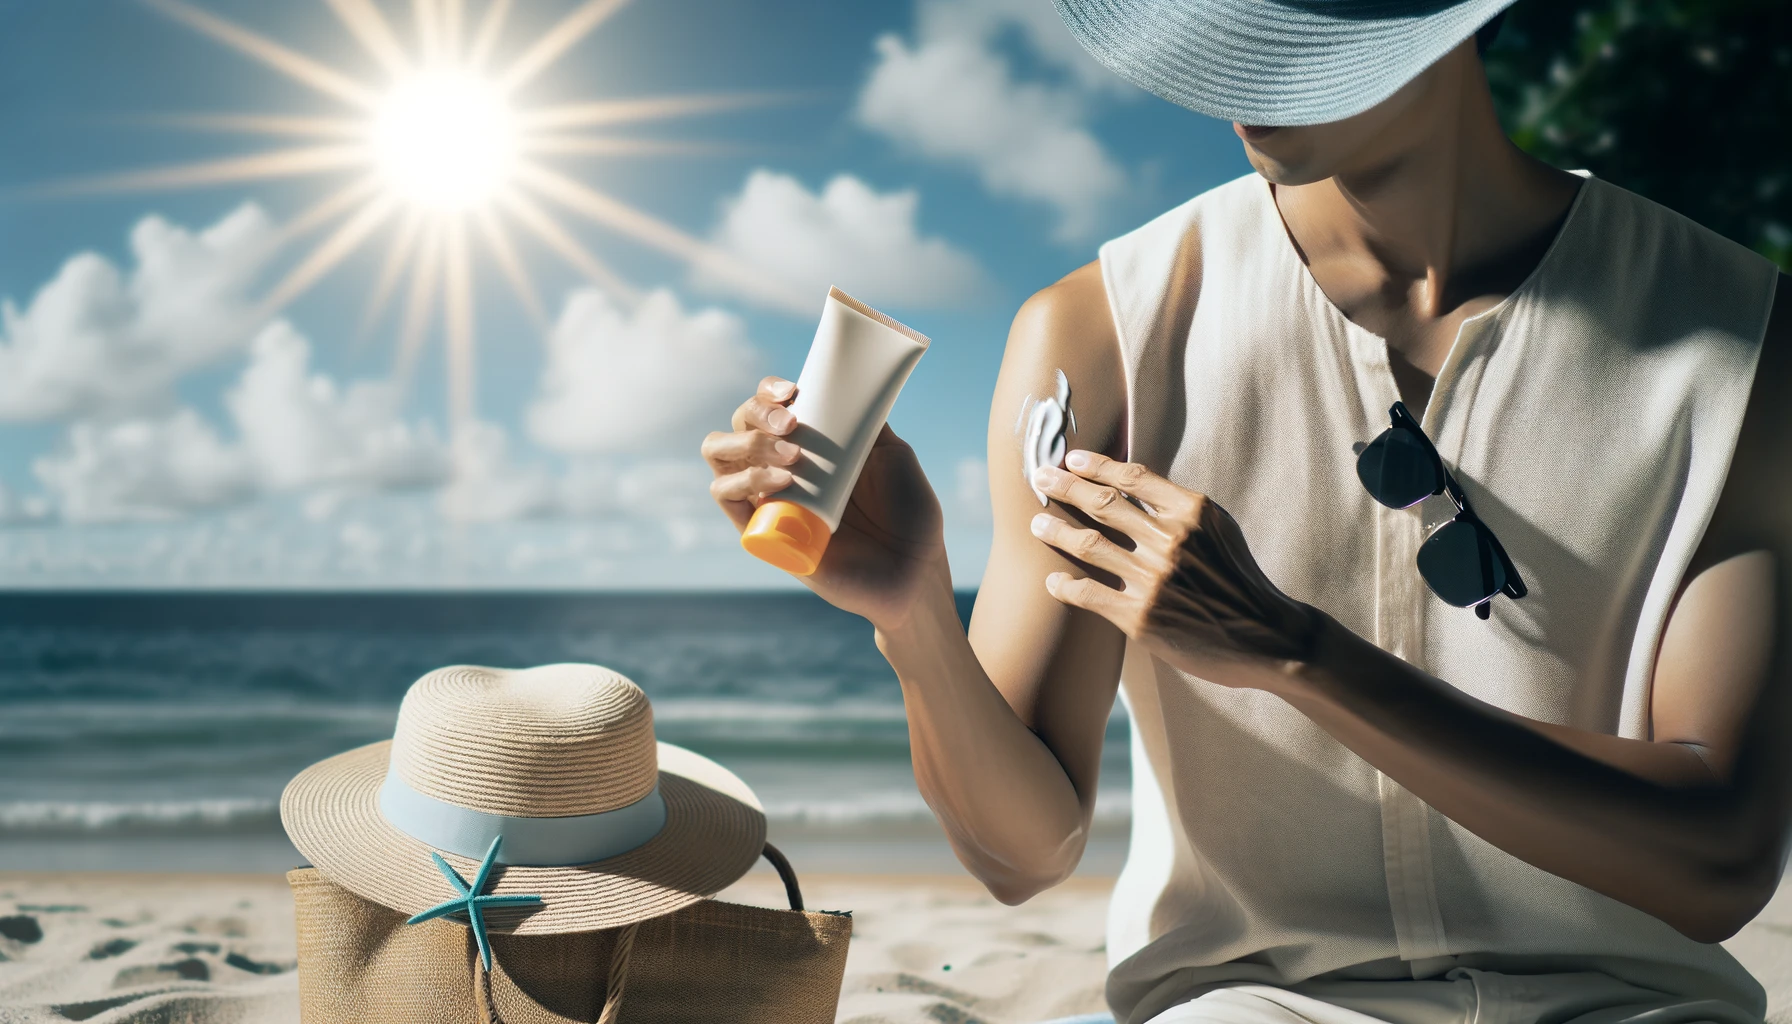 Asian person applying sunscreen on their arm at the beach, emphasizing skin protection on Healthy Life - New Start.